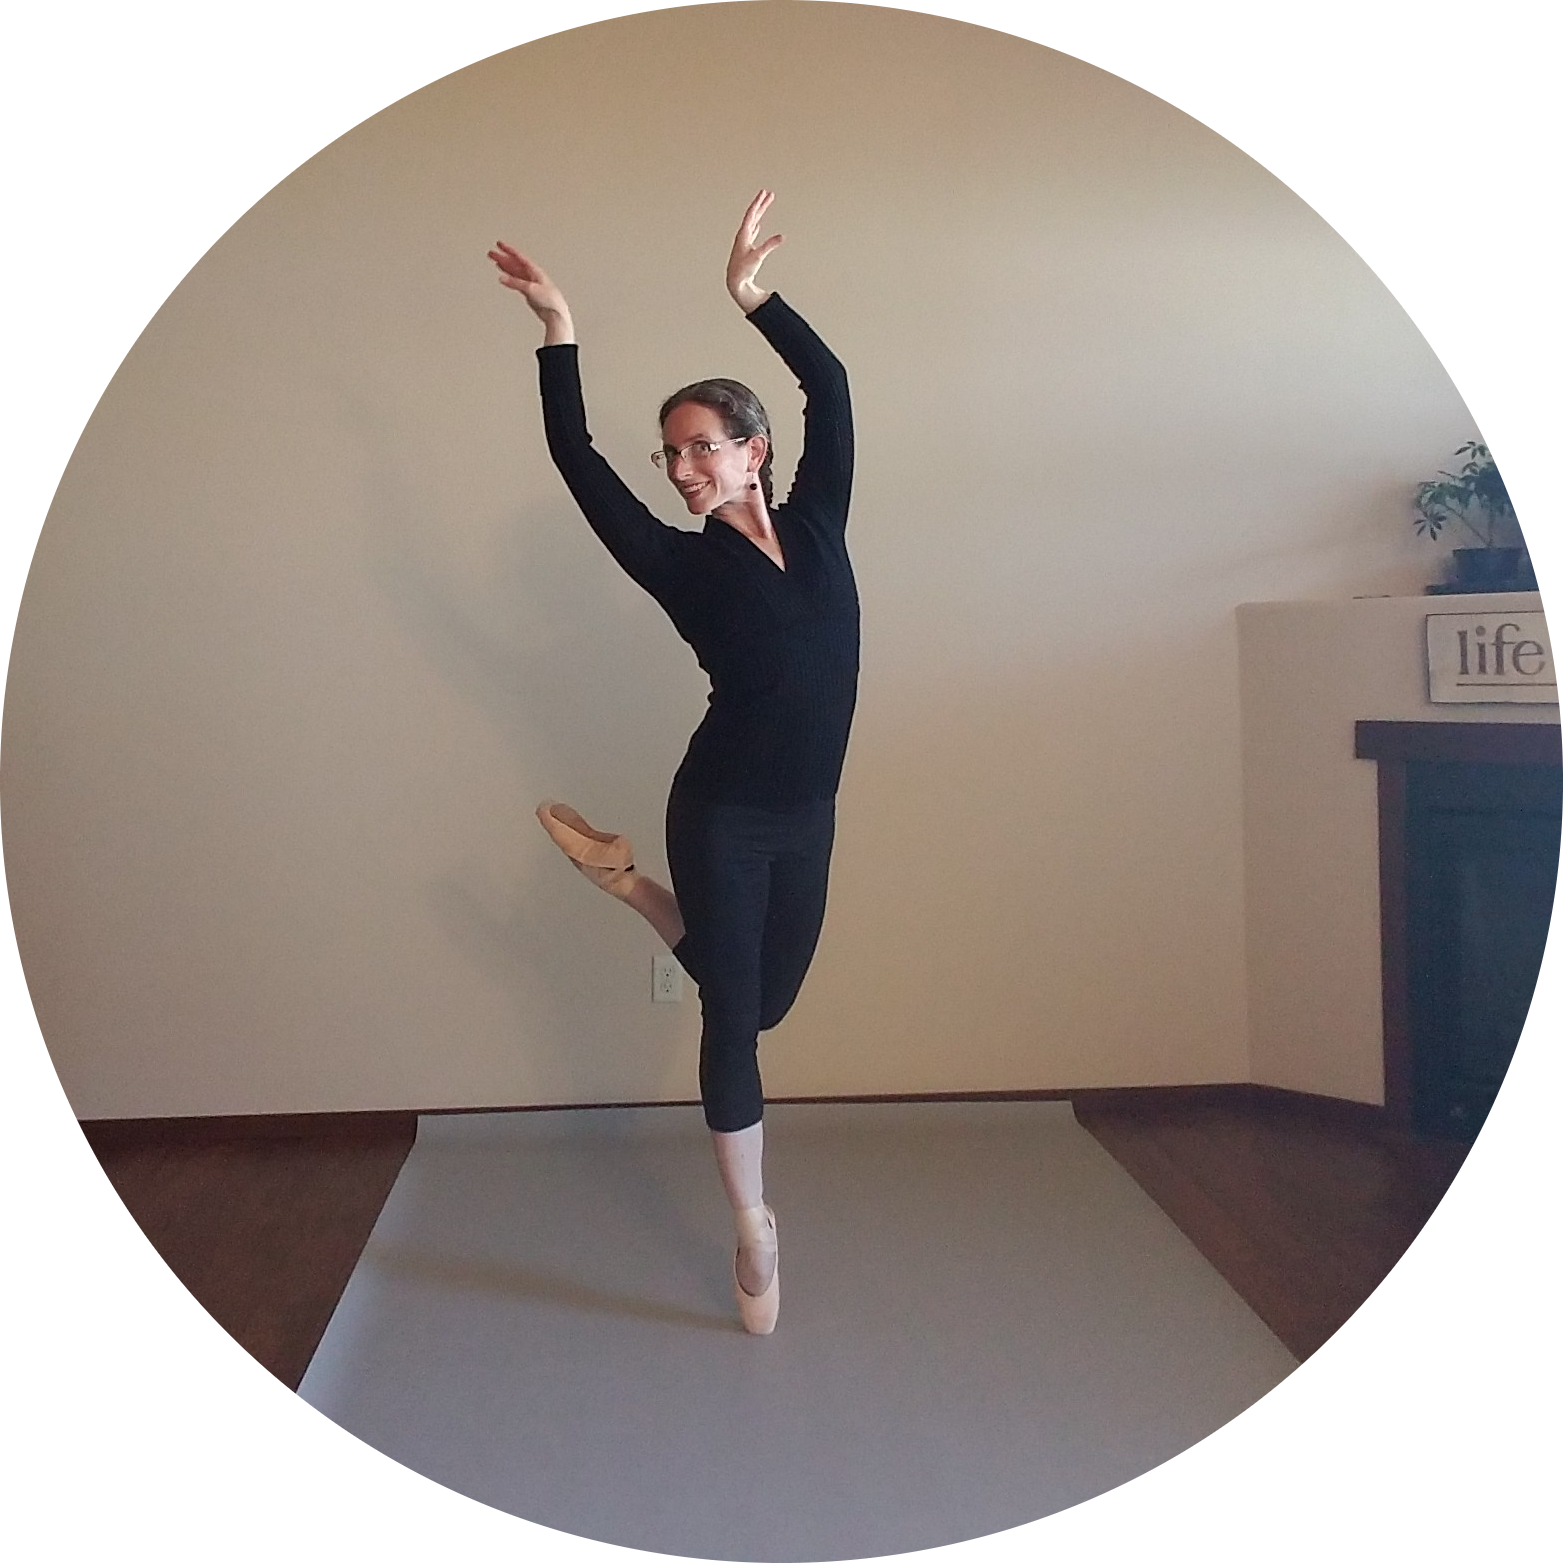 Instructor and Co-Founder Kate Feinberg Robins on one leg en pointe with other foot, hands, and gaze reaching to the left